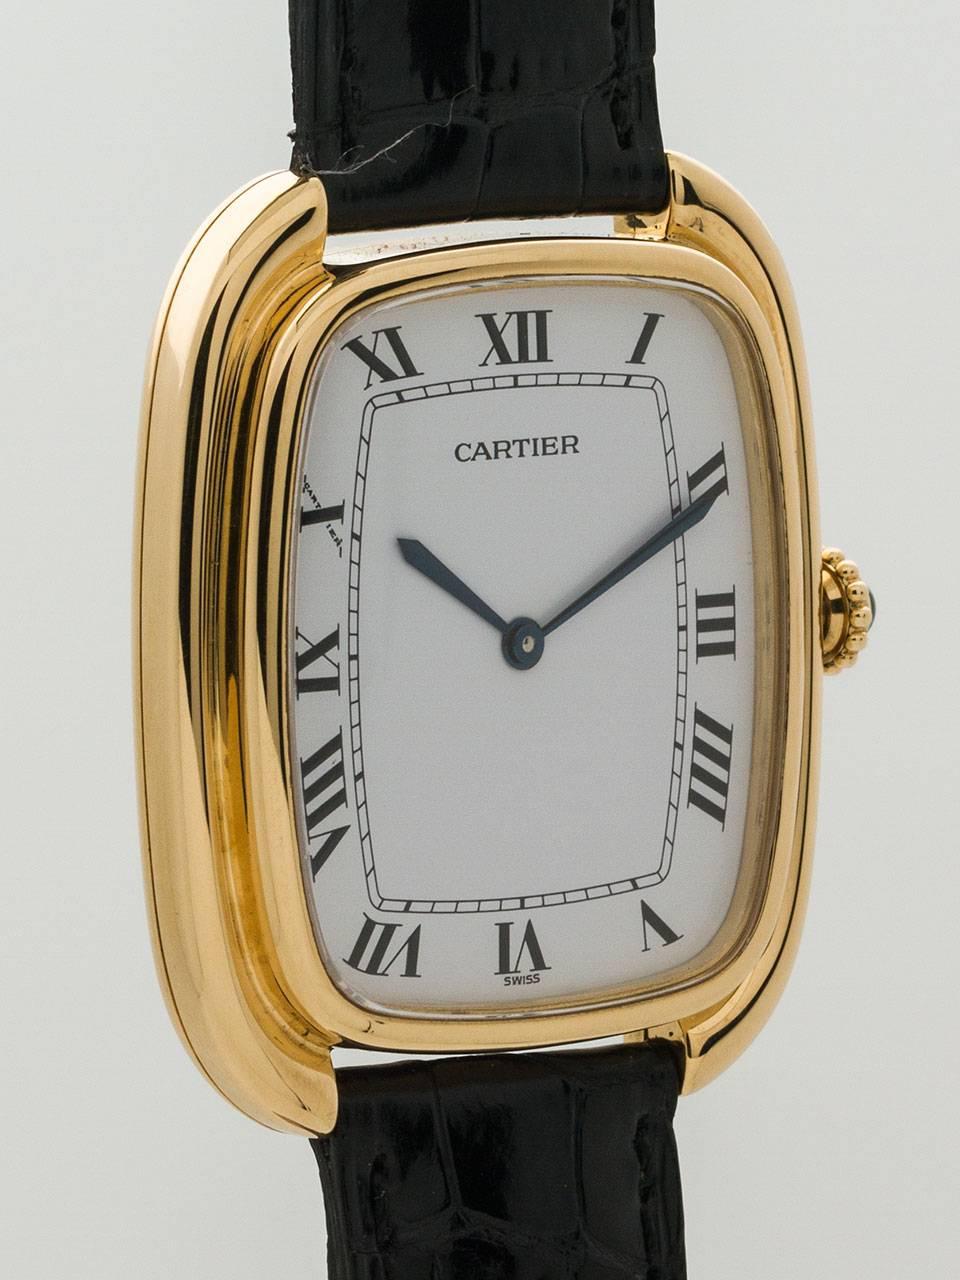 Cartier 18K Yellow Gold Gondole circa 1973. Very scarce and distinctive man’s model, featuring 24.5 x 29mm tonneau shaped stepped case with caseback secured by screws. White original dial with black Roman figures and blued steel hands. Powered by